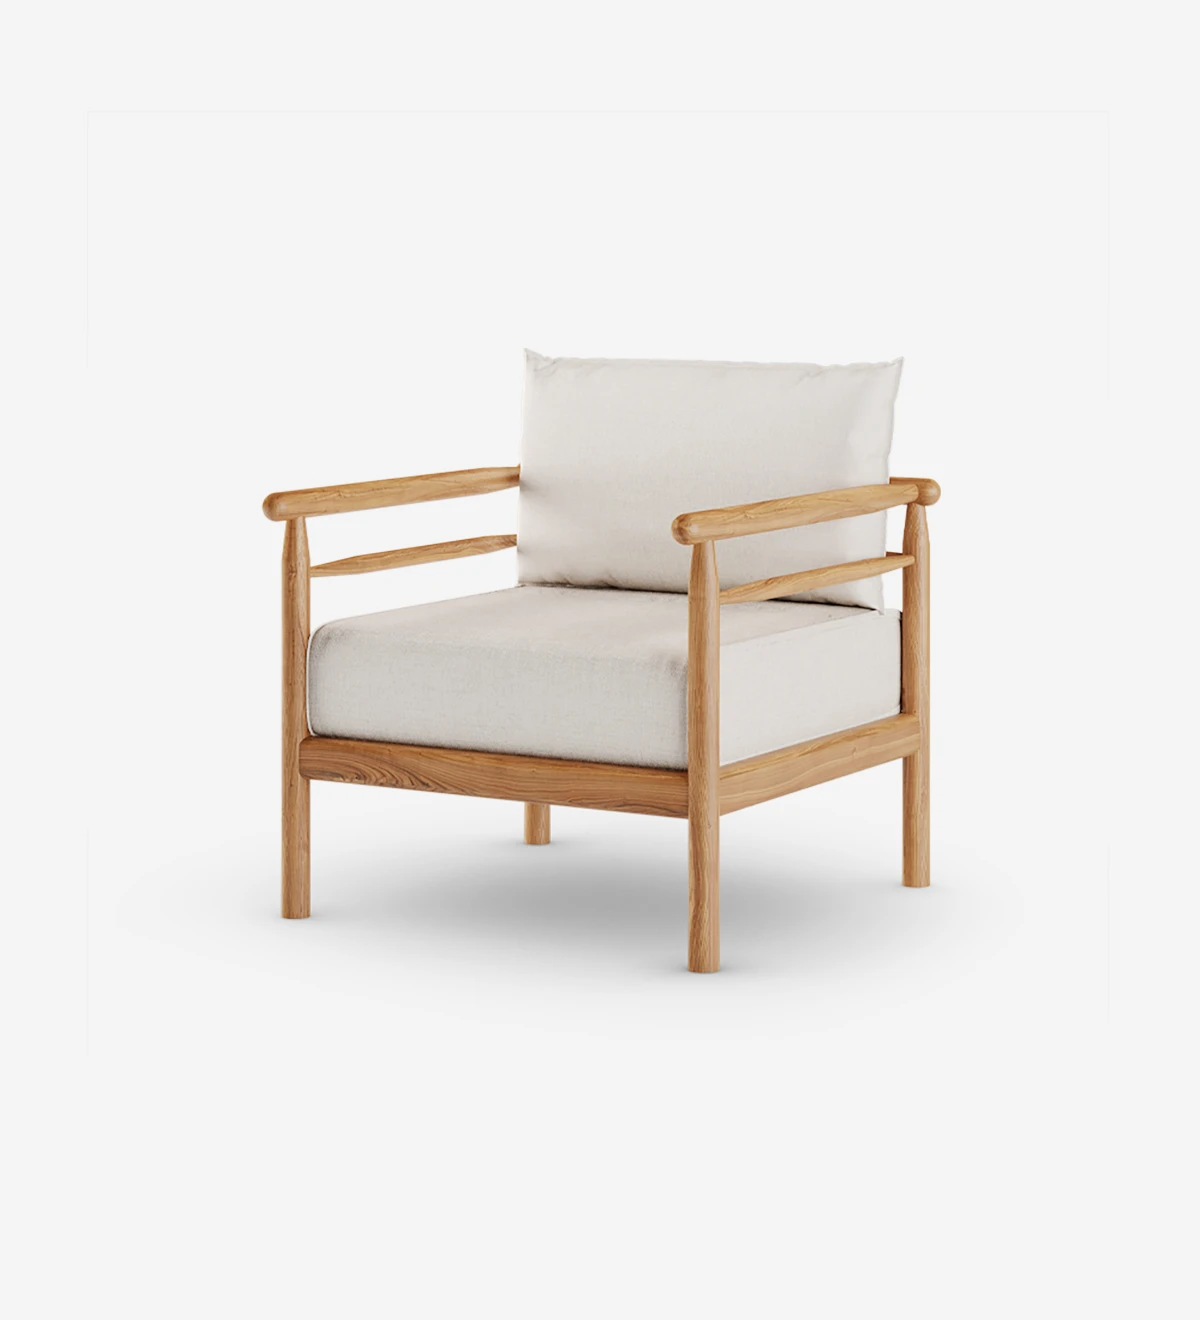 Maple with fabric upholstered cushions and natural wood frame